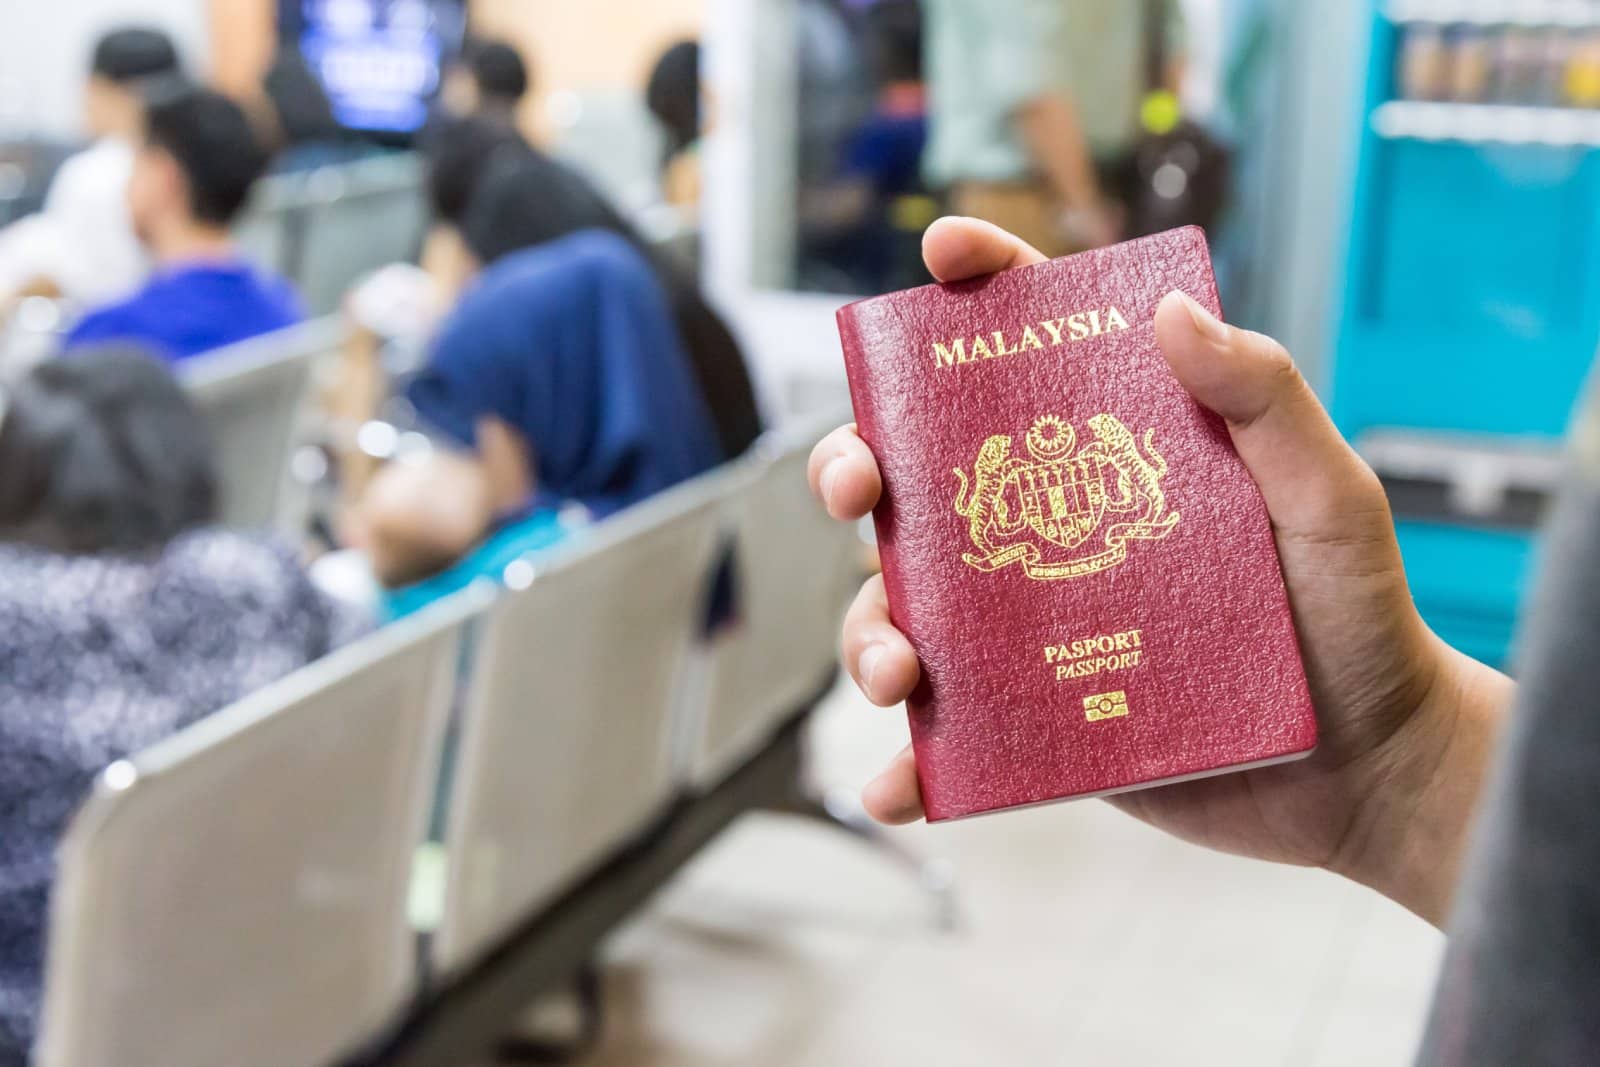 <p><span>Malaysia offers a number of visa options for foreign nationals, including the Residence Pass-Talent for highly qualified expats, the digital nomad visa under the De Rantau Program, and the MMH2 (Malaysia My 2nd Home) visa for retirees with liquid assets and a monthly income of $2500 per month.</span></p>